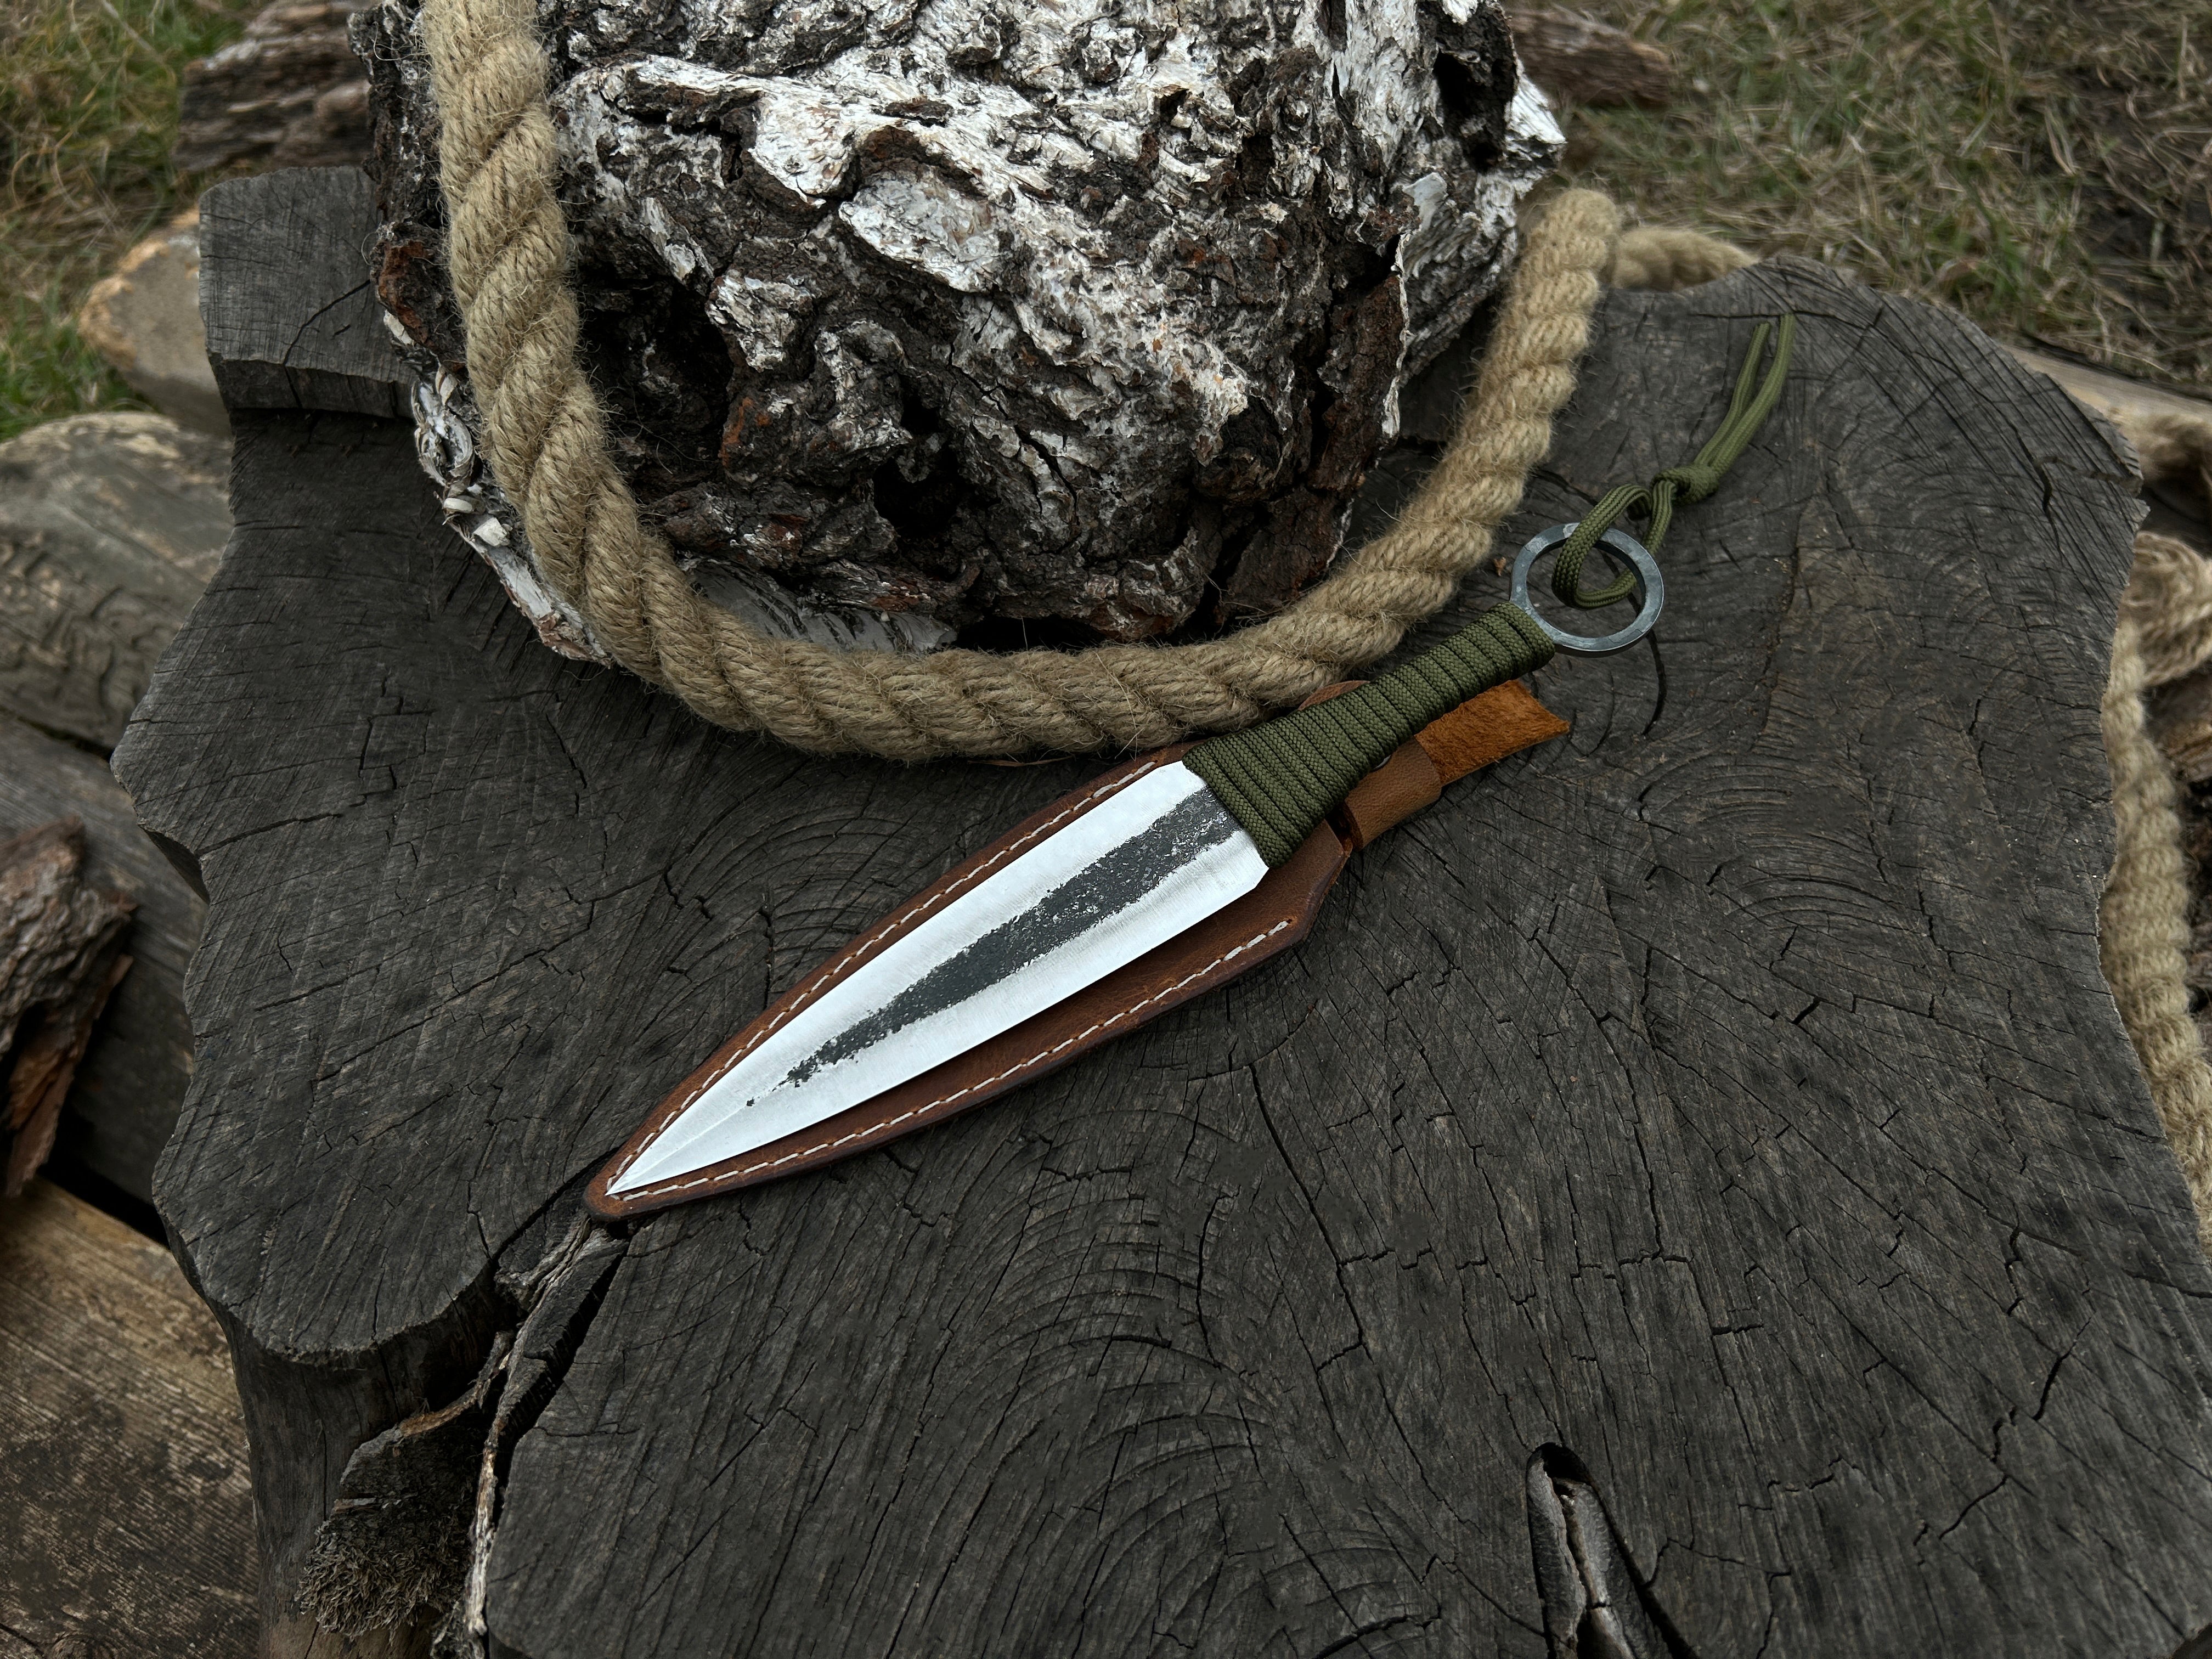 Hand-Forged Throwing Knife, Total Length - 22.5 cm (8.8 inches)